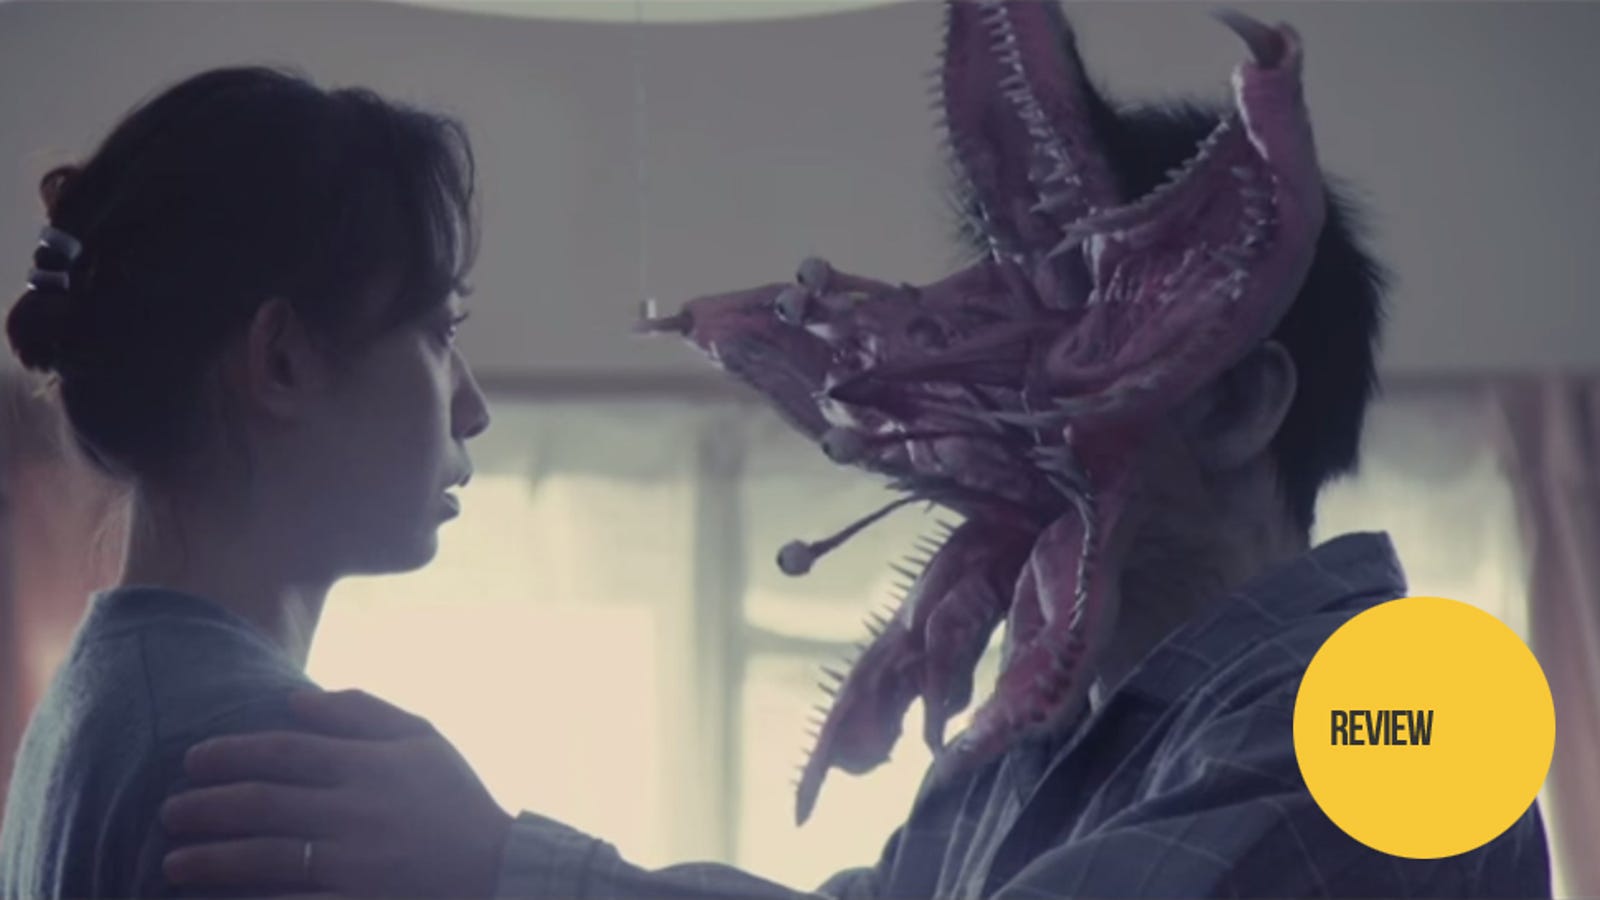 The First Parasyte Movie is an Insult to the Manga1600 x 900